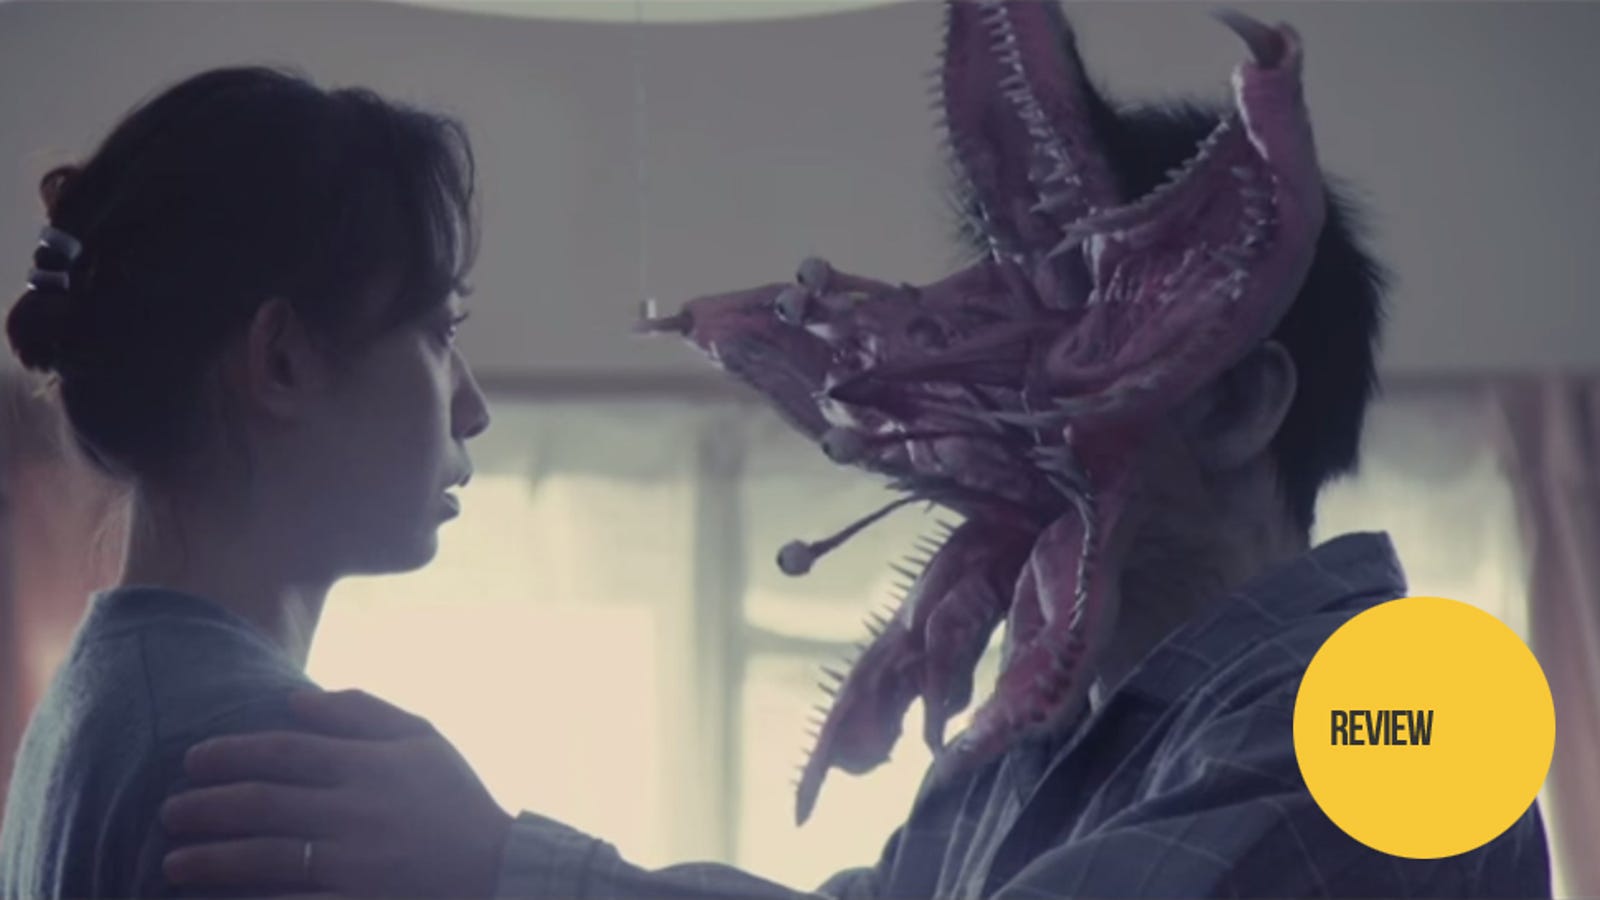 The First Parasyte Movie is an Insult to the Manga1600 x 900